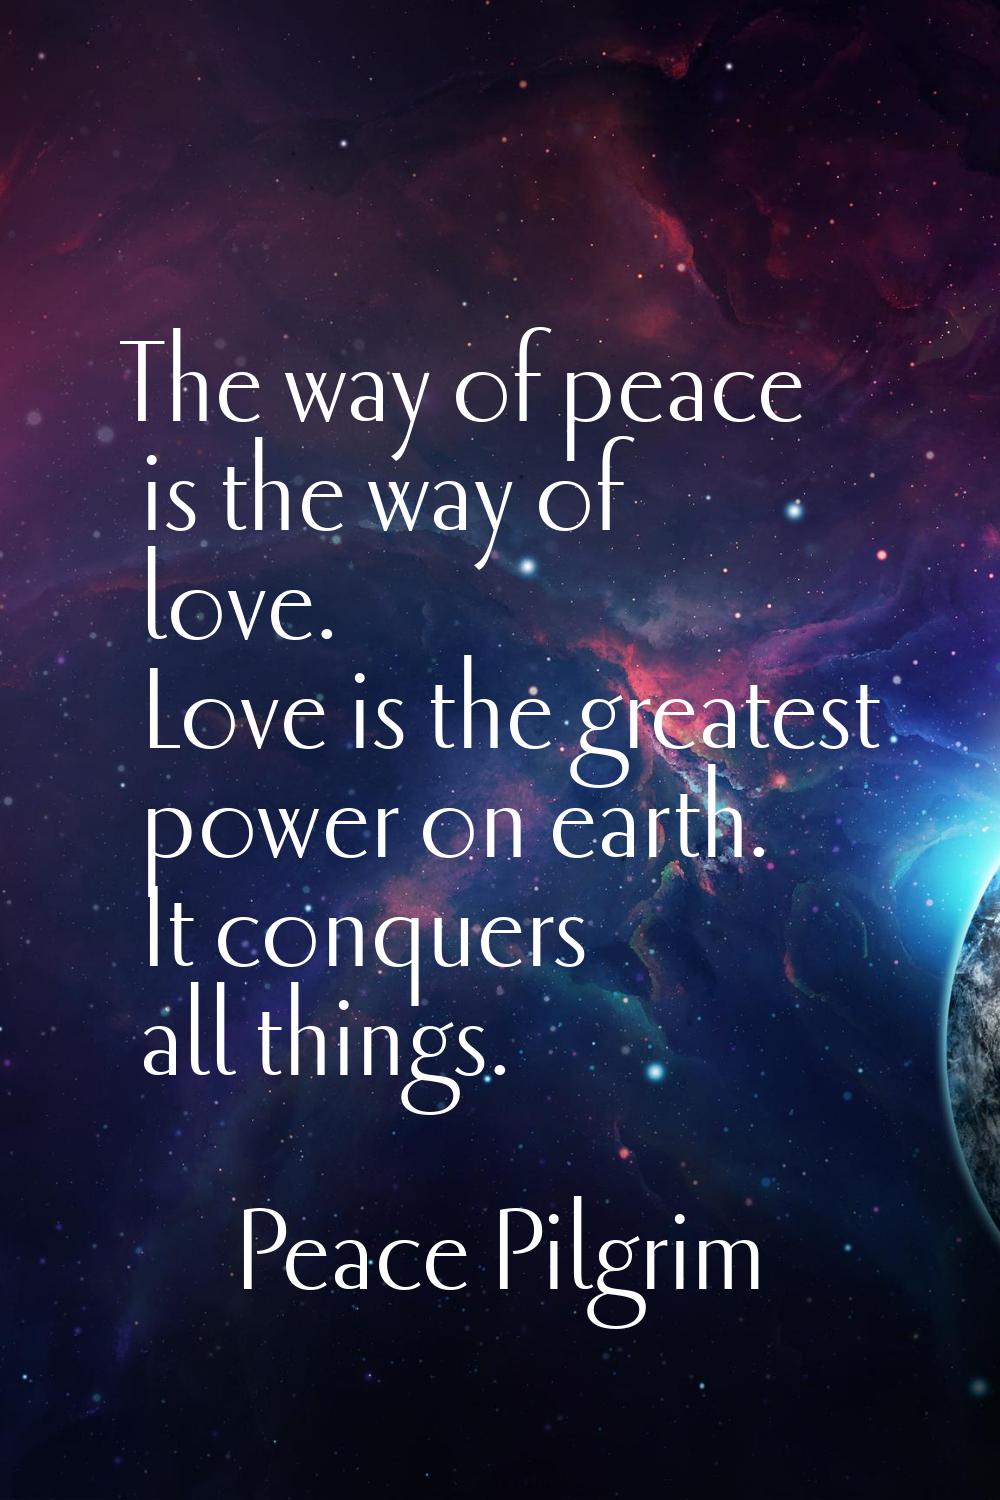 The way of peace is the way of love. Love is the greatest power on earth. It conquers all things.